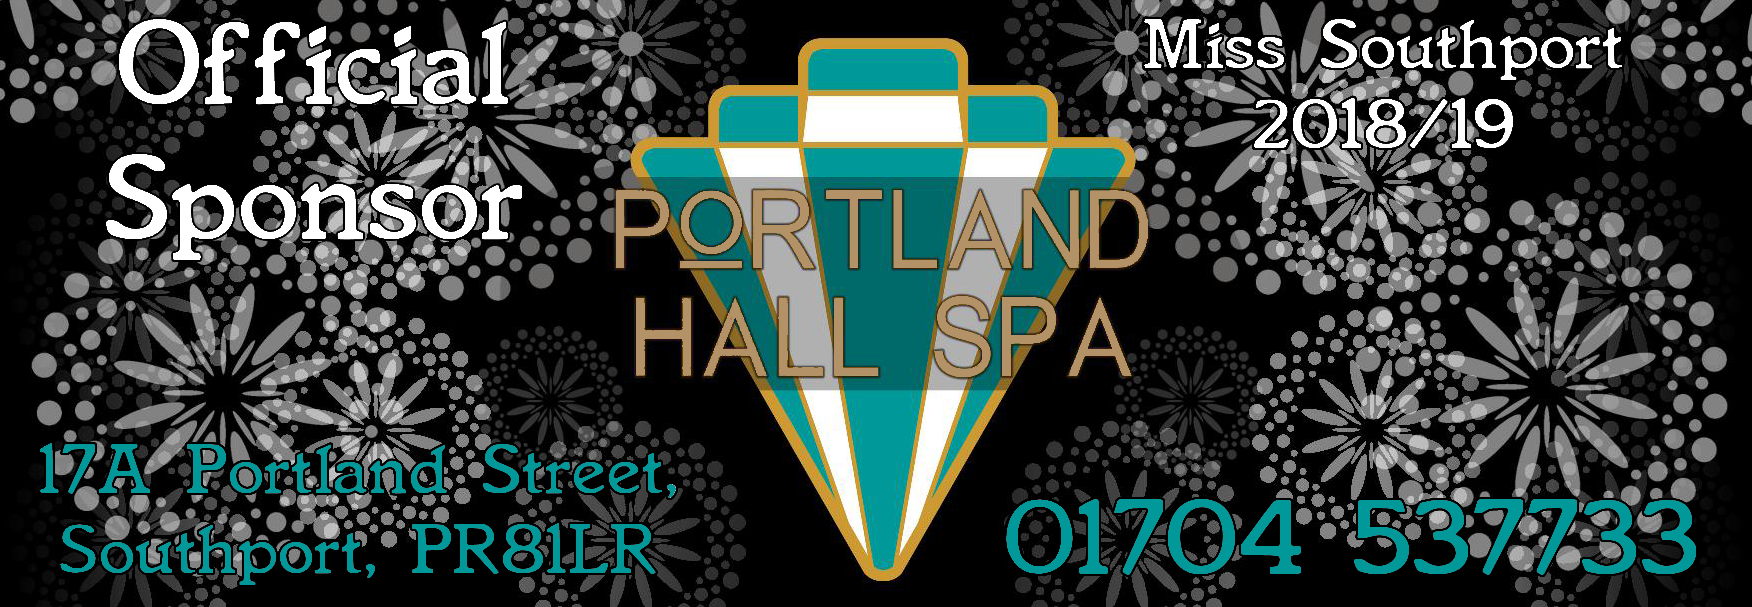 An award-winning, Moroccan themed day spa, Portland Hall Spa are the official main sponsor of Miss Southport 2018/19.